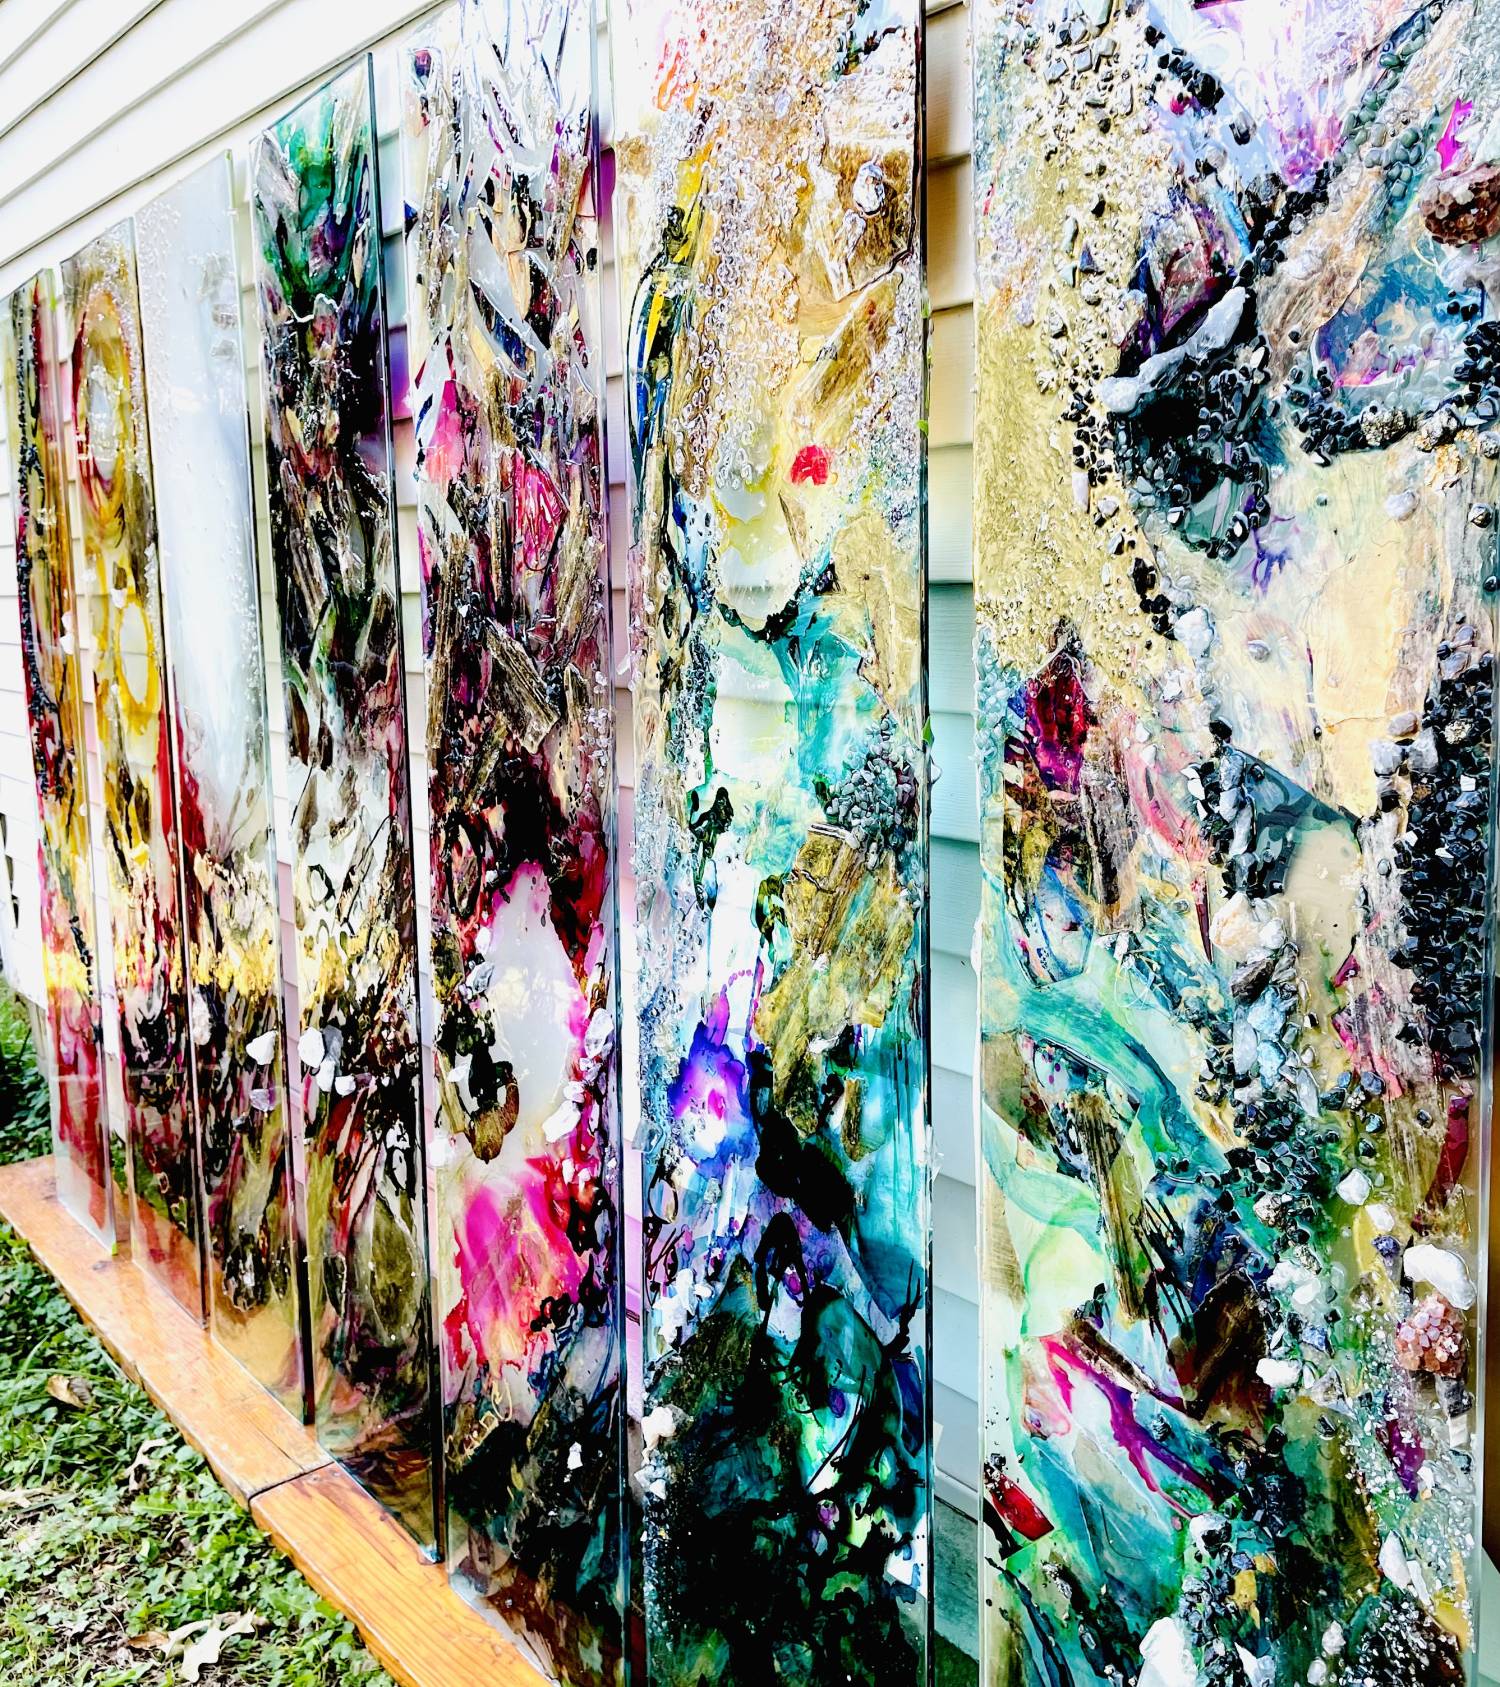 Angle photo of Tammy Campbell's artwork across 7 panels. Mixed media including gemstones in abstract shapes with continuity from one panel to the next. Prominent colors include teal, pink, gold, white, green.